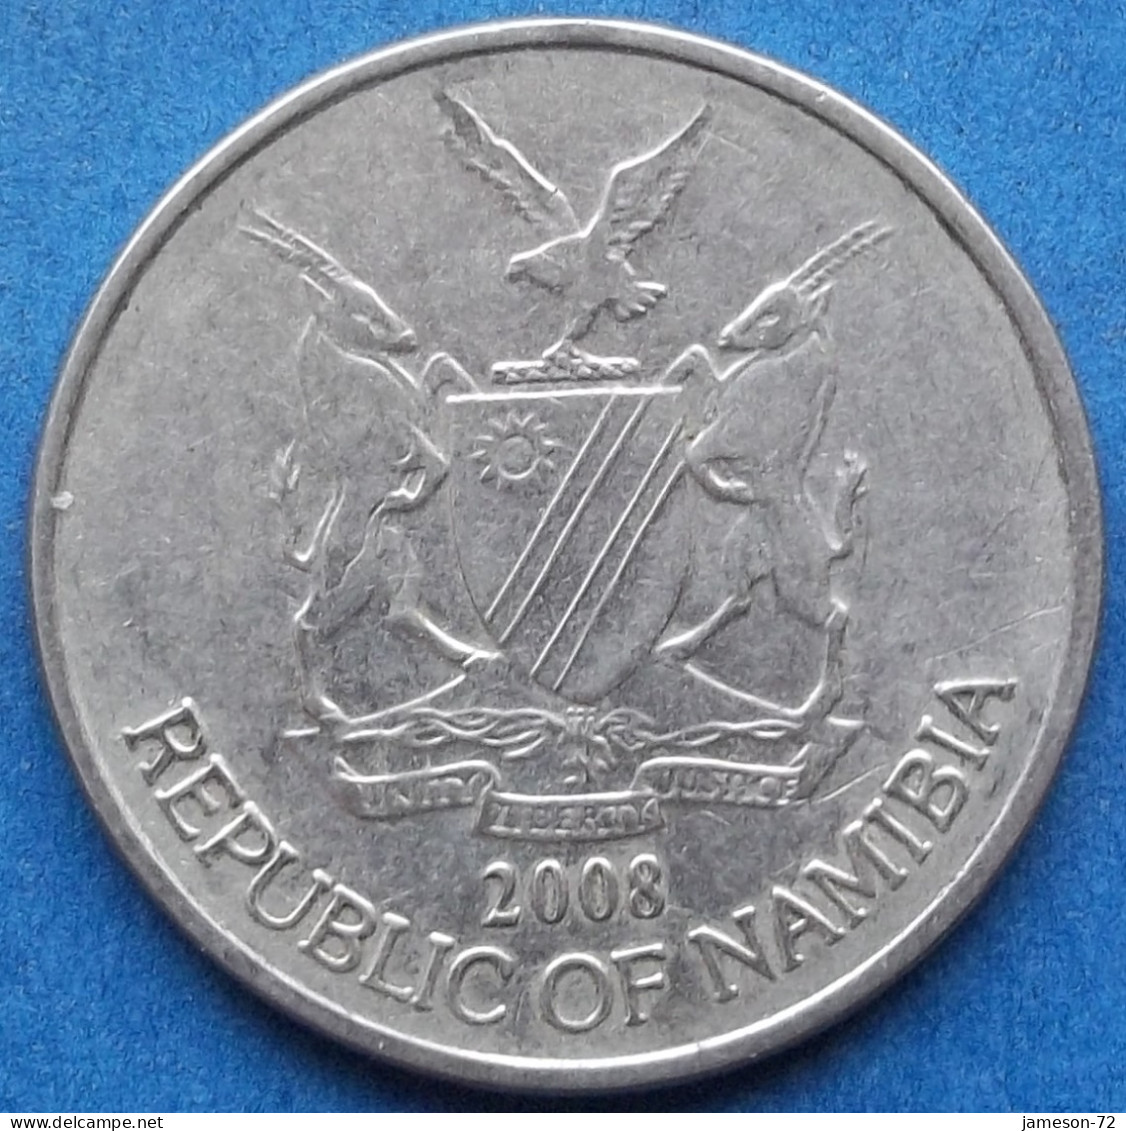 NAMIBIA - 50 Cents 2008 "Quiver Tree" KM# 3 Independent Republic (1990) - Edelweiss Coins - Namibie